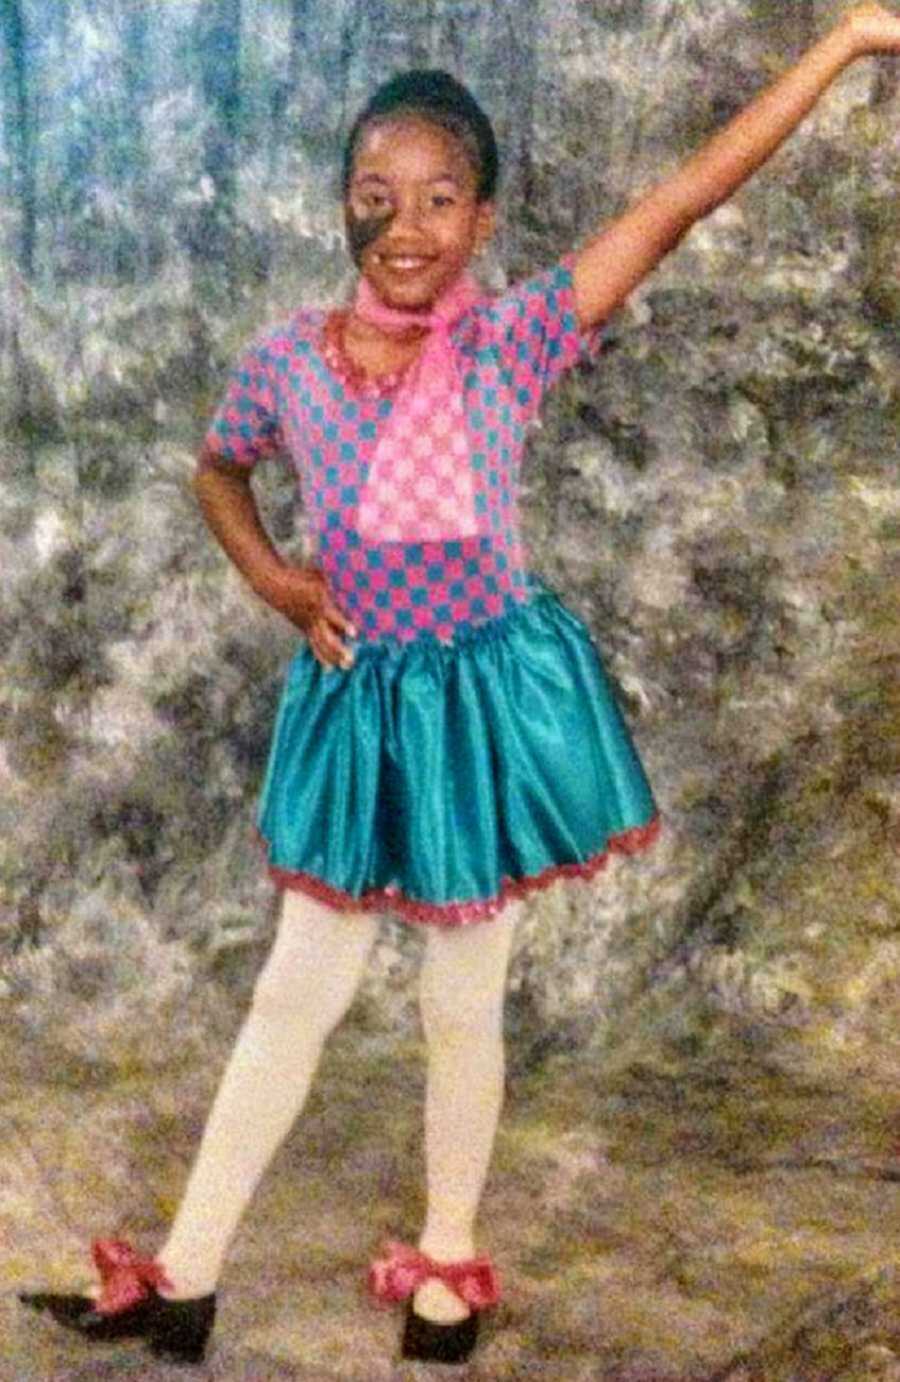 Girl posing in pink and blue dance attire